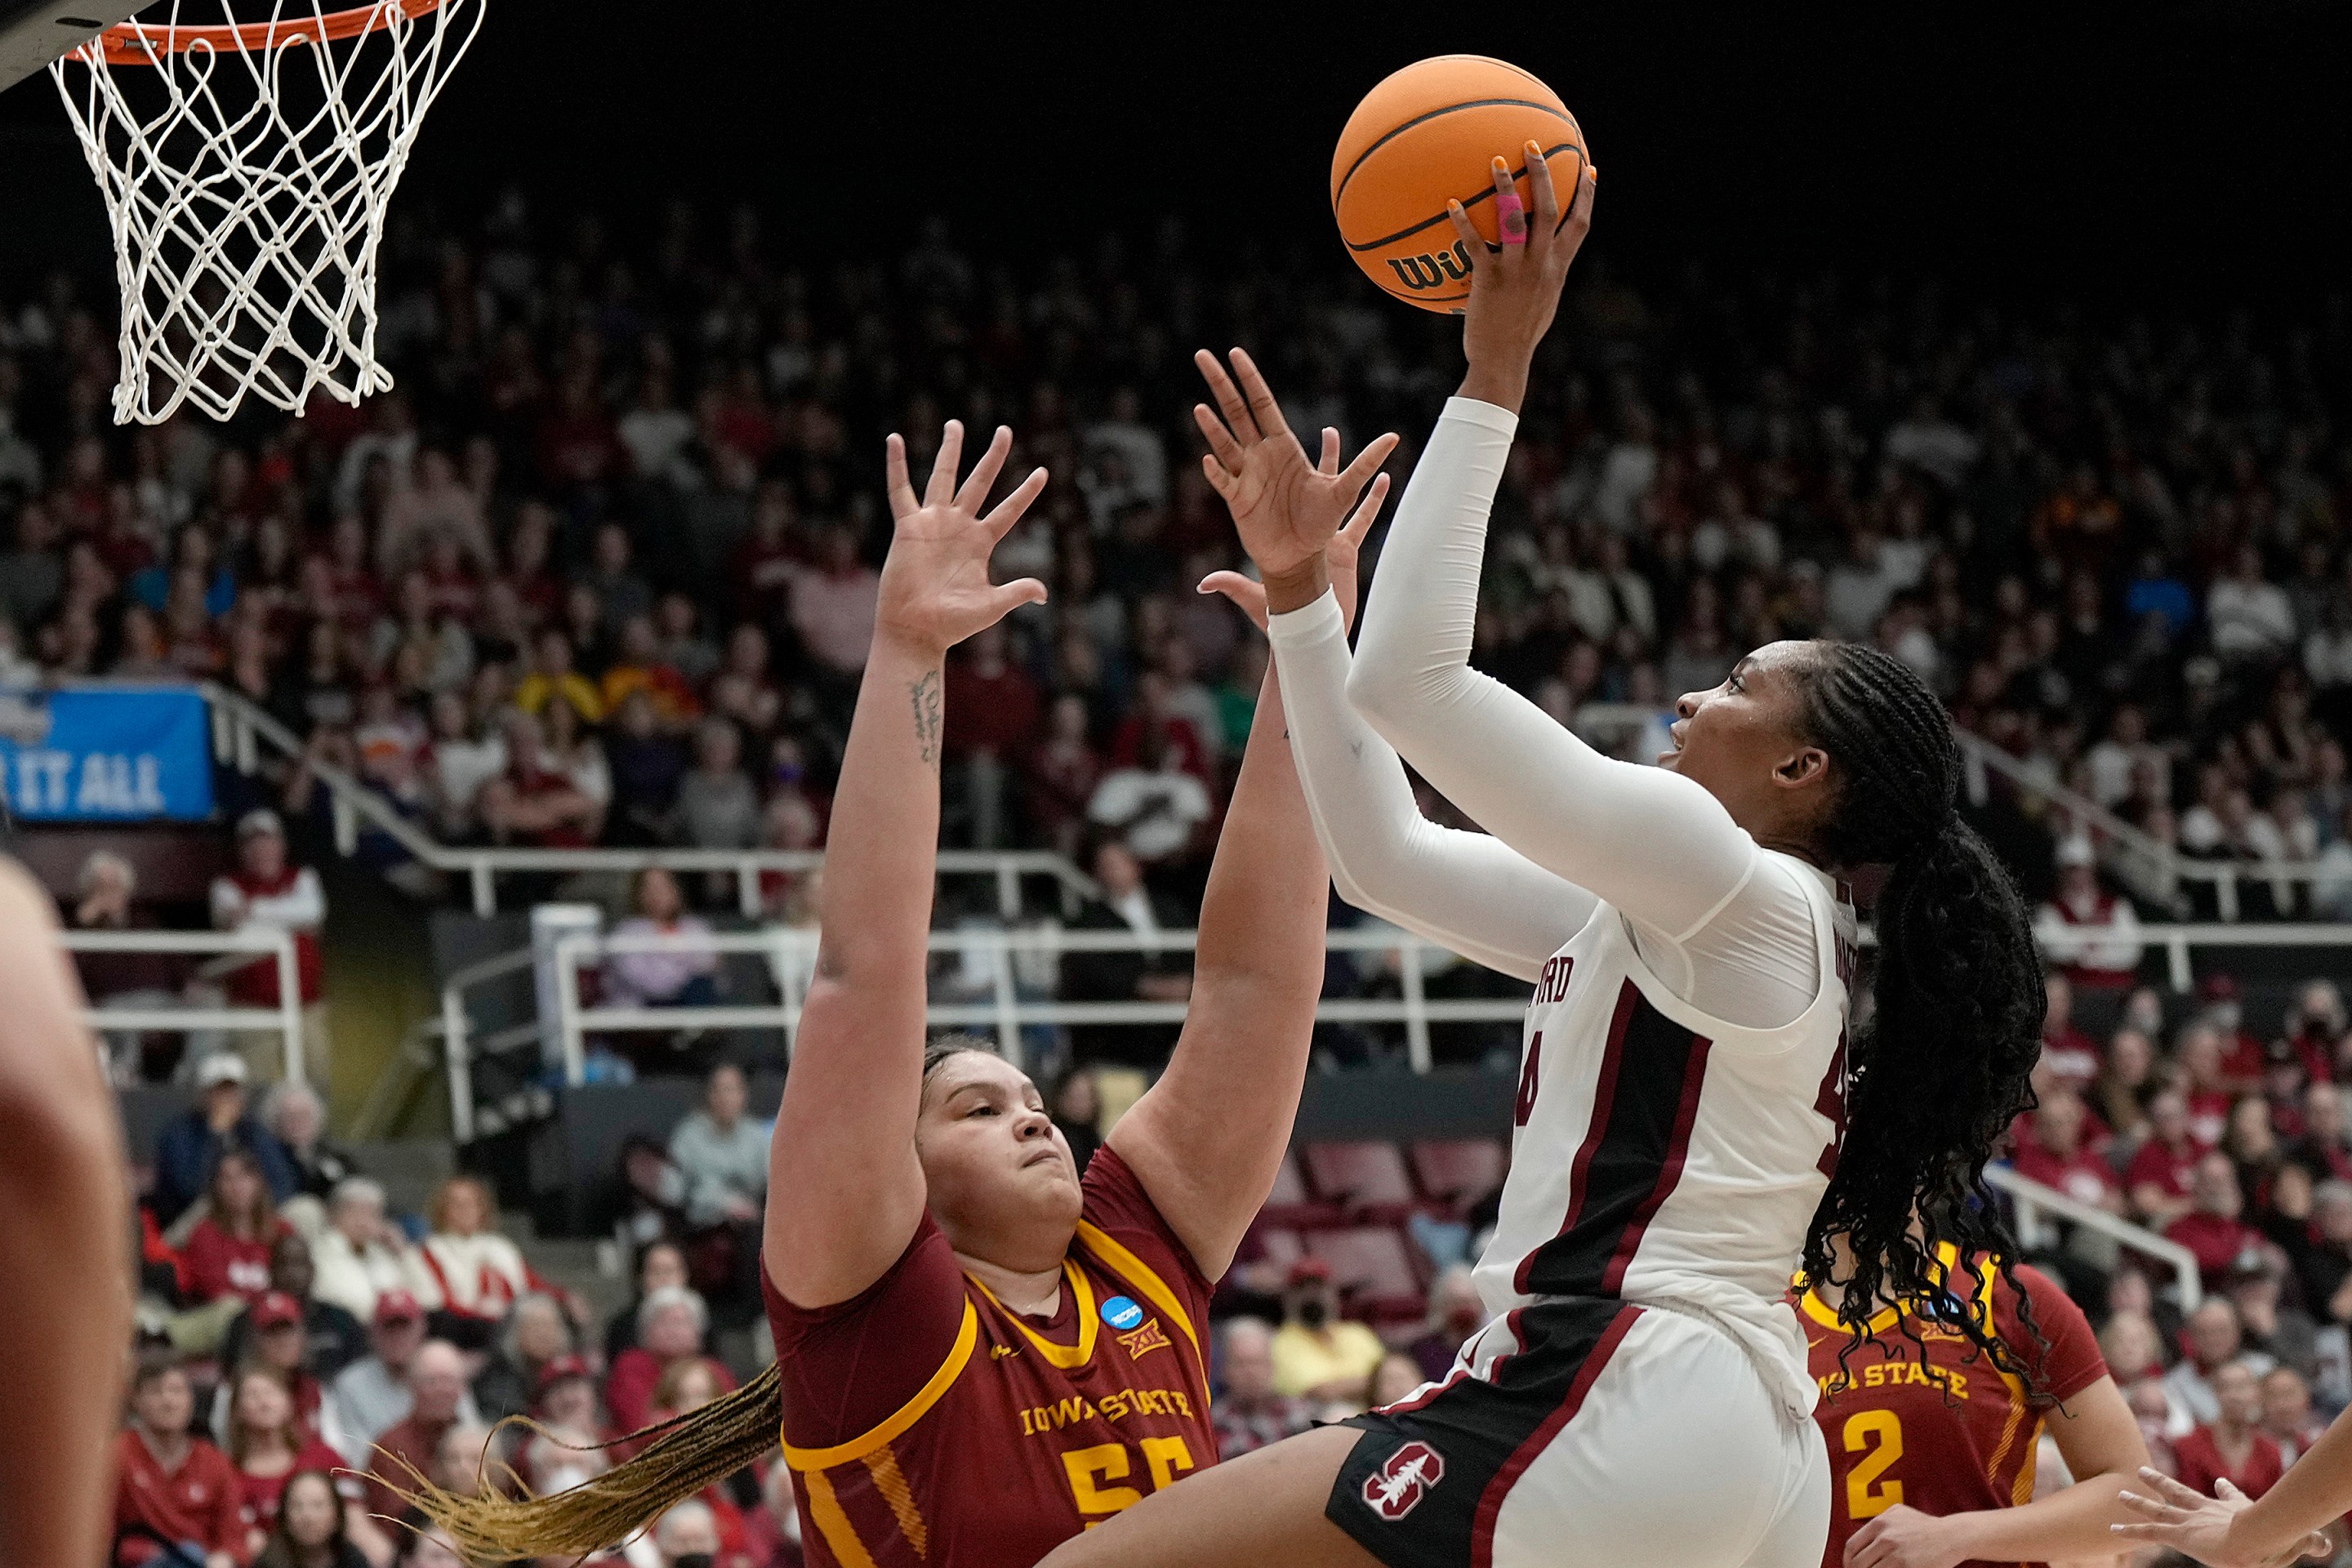 Kiki Iriafen #44 of the Stanford Cardinal drives to the basket on Audi Crooks #55 of the Iowa State Cyclones during the second half in the second round of the NCAA Women's Basketball Tournament at Stanford Maples Pavilion on March 24, 2024 in Palo Alto, California.